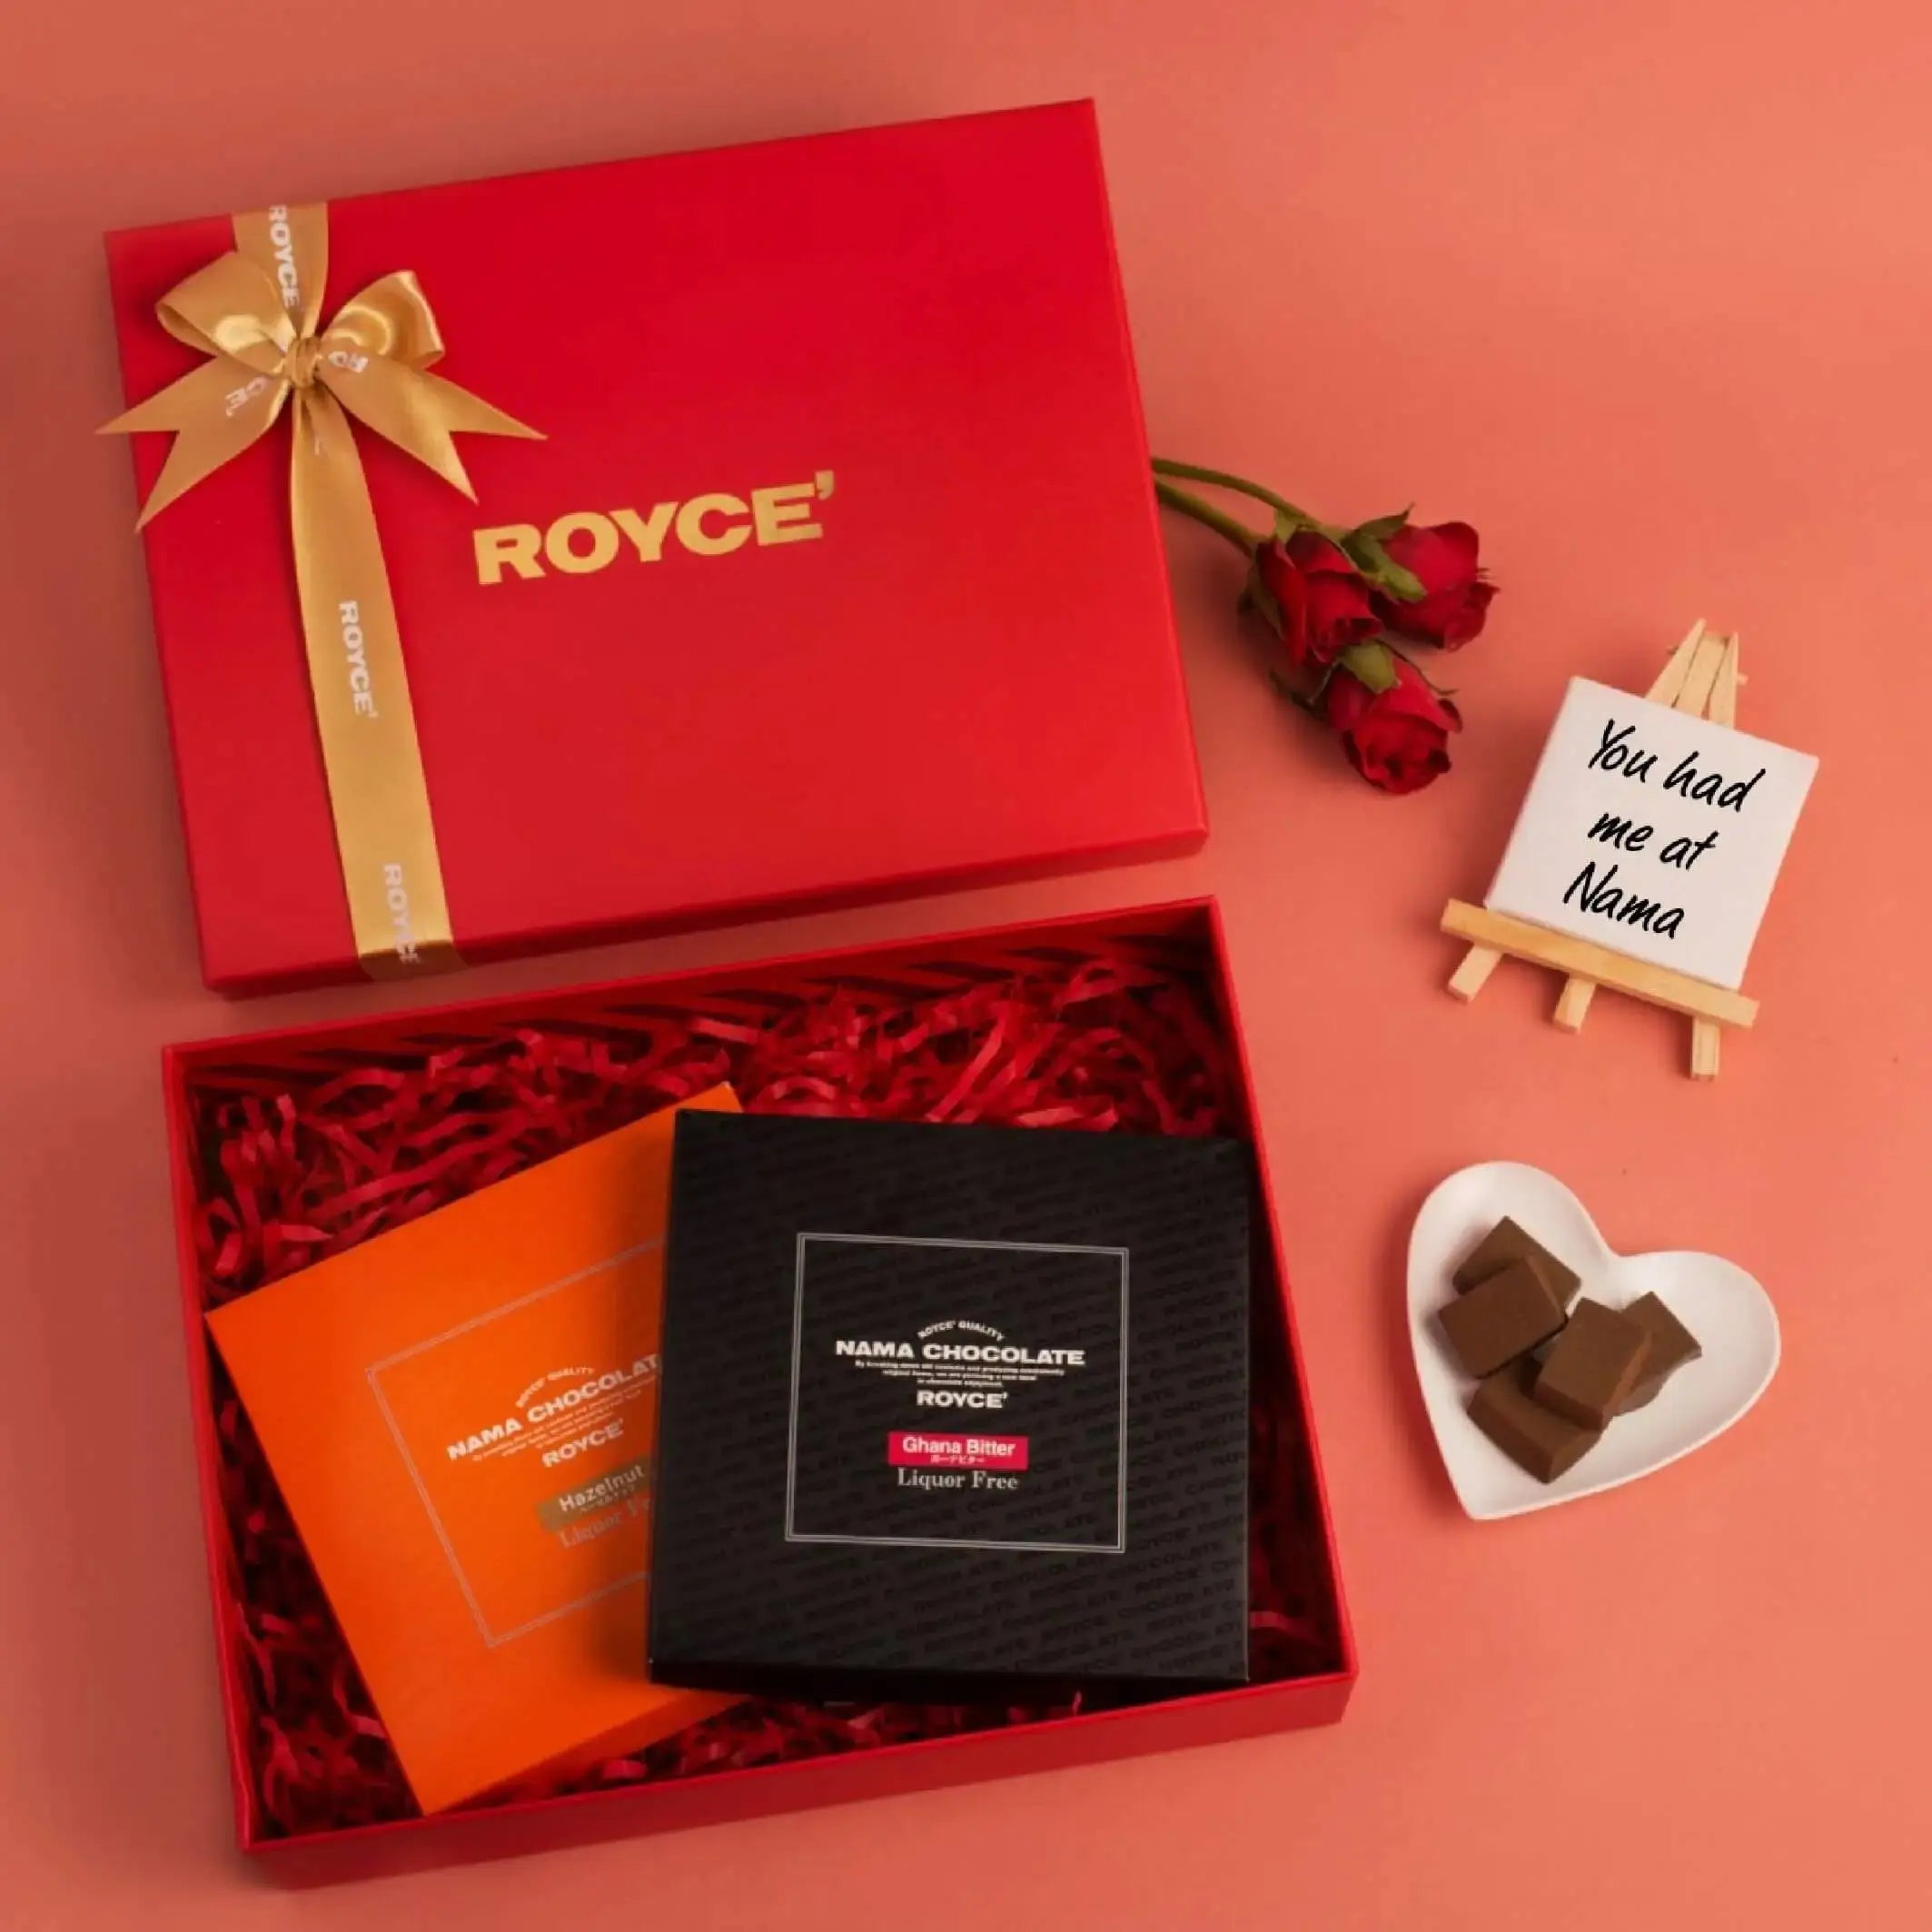 In US, chocolate is the favorite Valentine's Day gift, survey finds